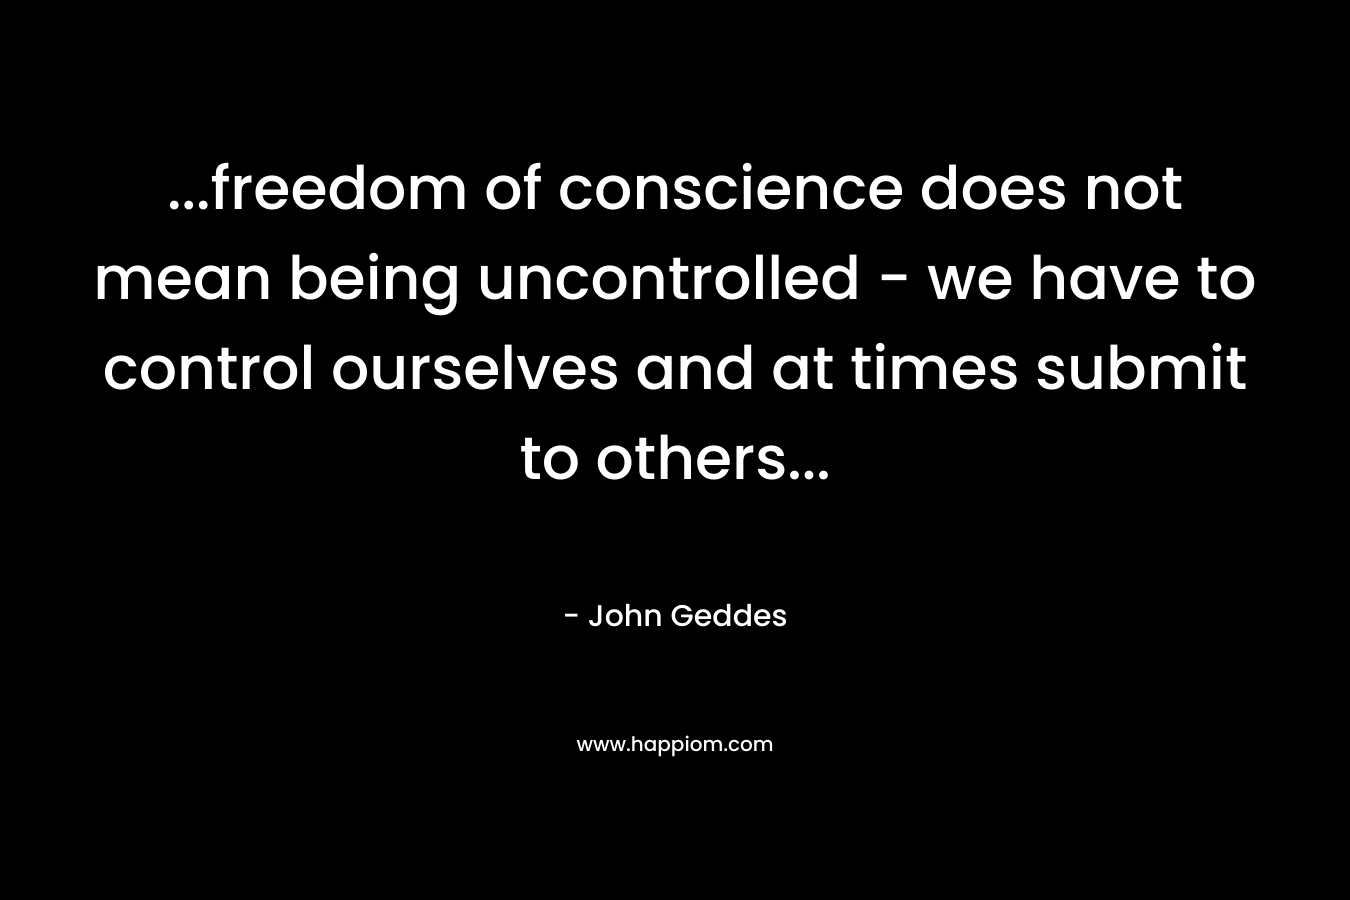 …freedom of conscience does not mean being uncontrolled – we have to control ourselves and at times submit to others… – John Geddes